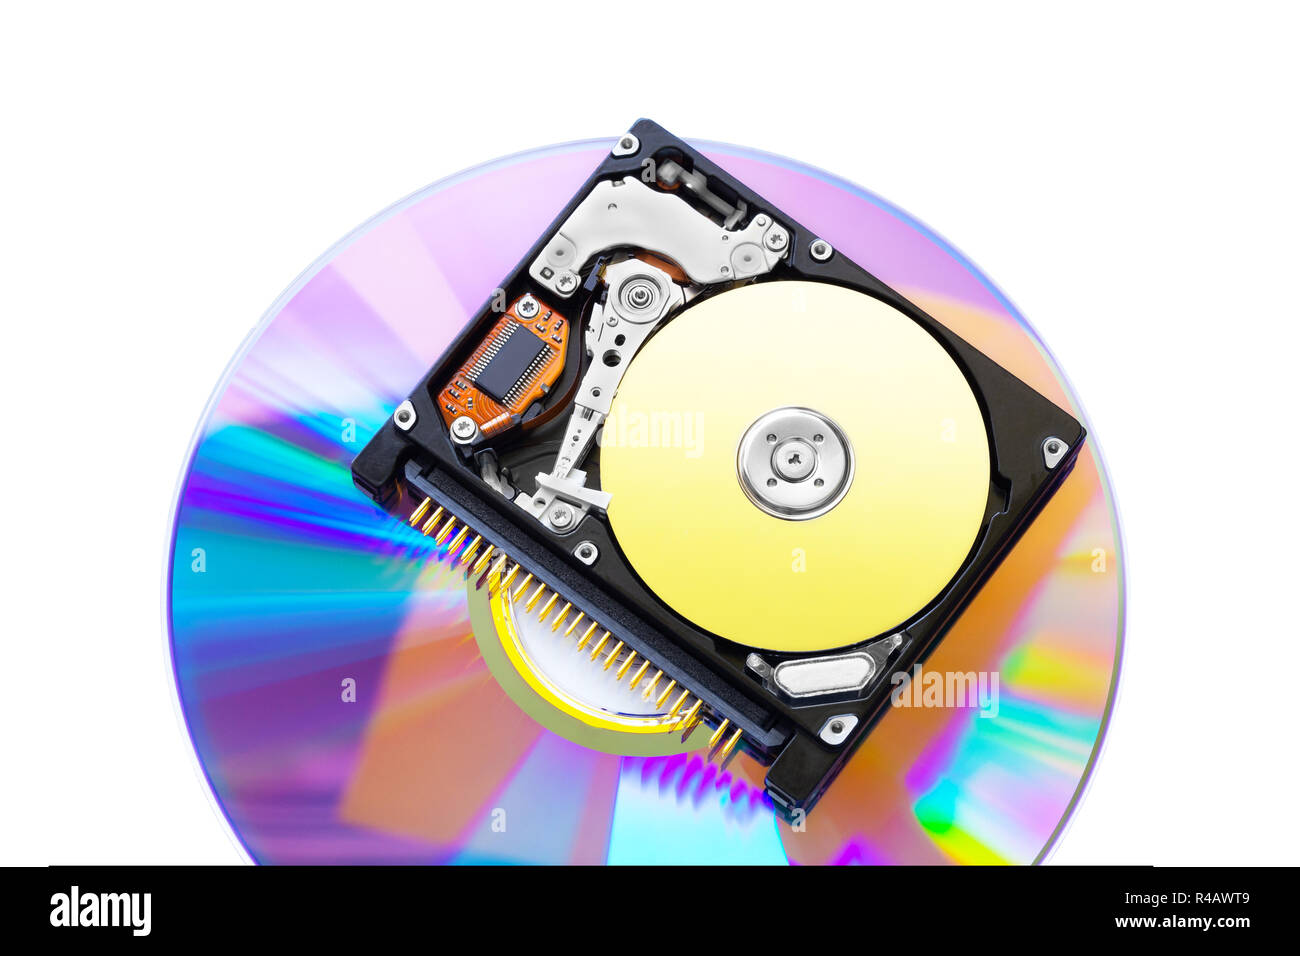 The compact hard disk form factor 1.8' with the lid open, lies on the optical disk. Stock Photo